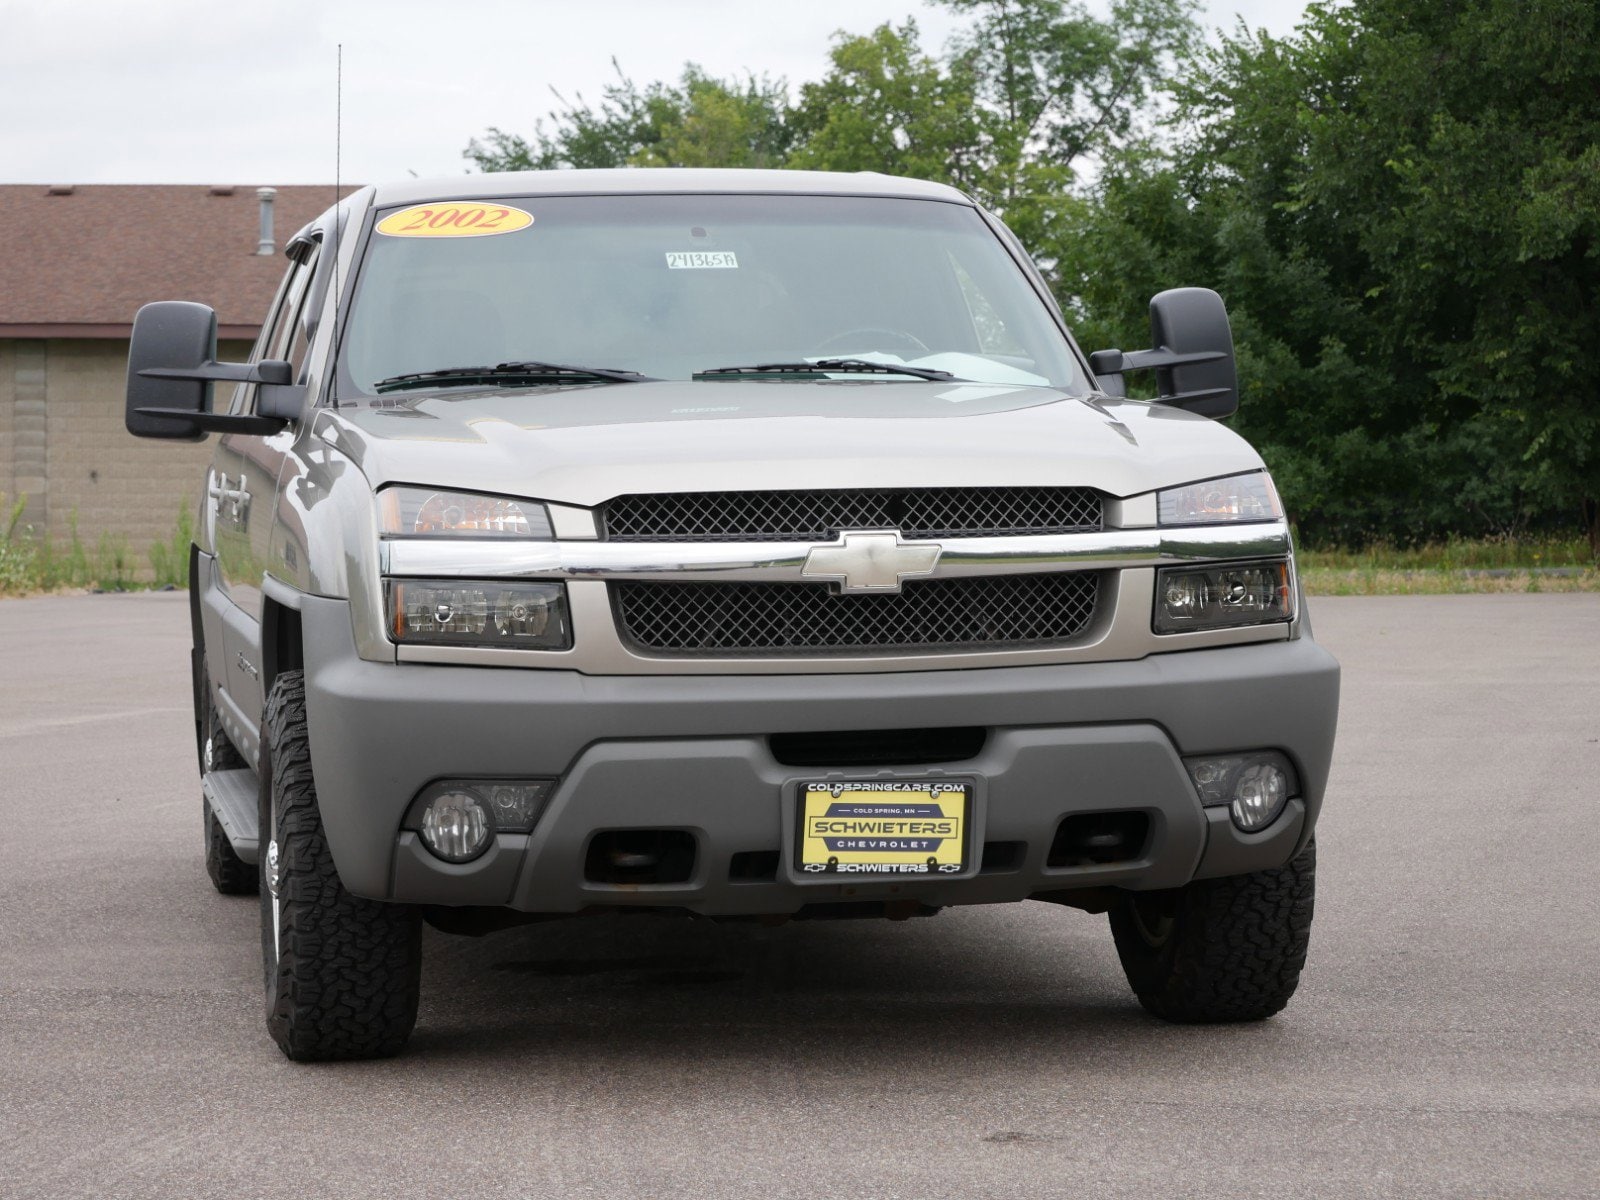 Used 2002 Chevrolet Avalanche Base with VIN 3GNGK23G72G311718 for sale in Cold Spring, Minnesota